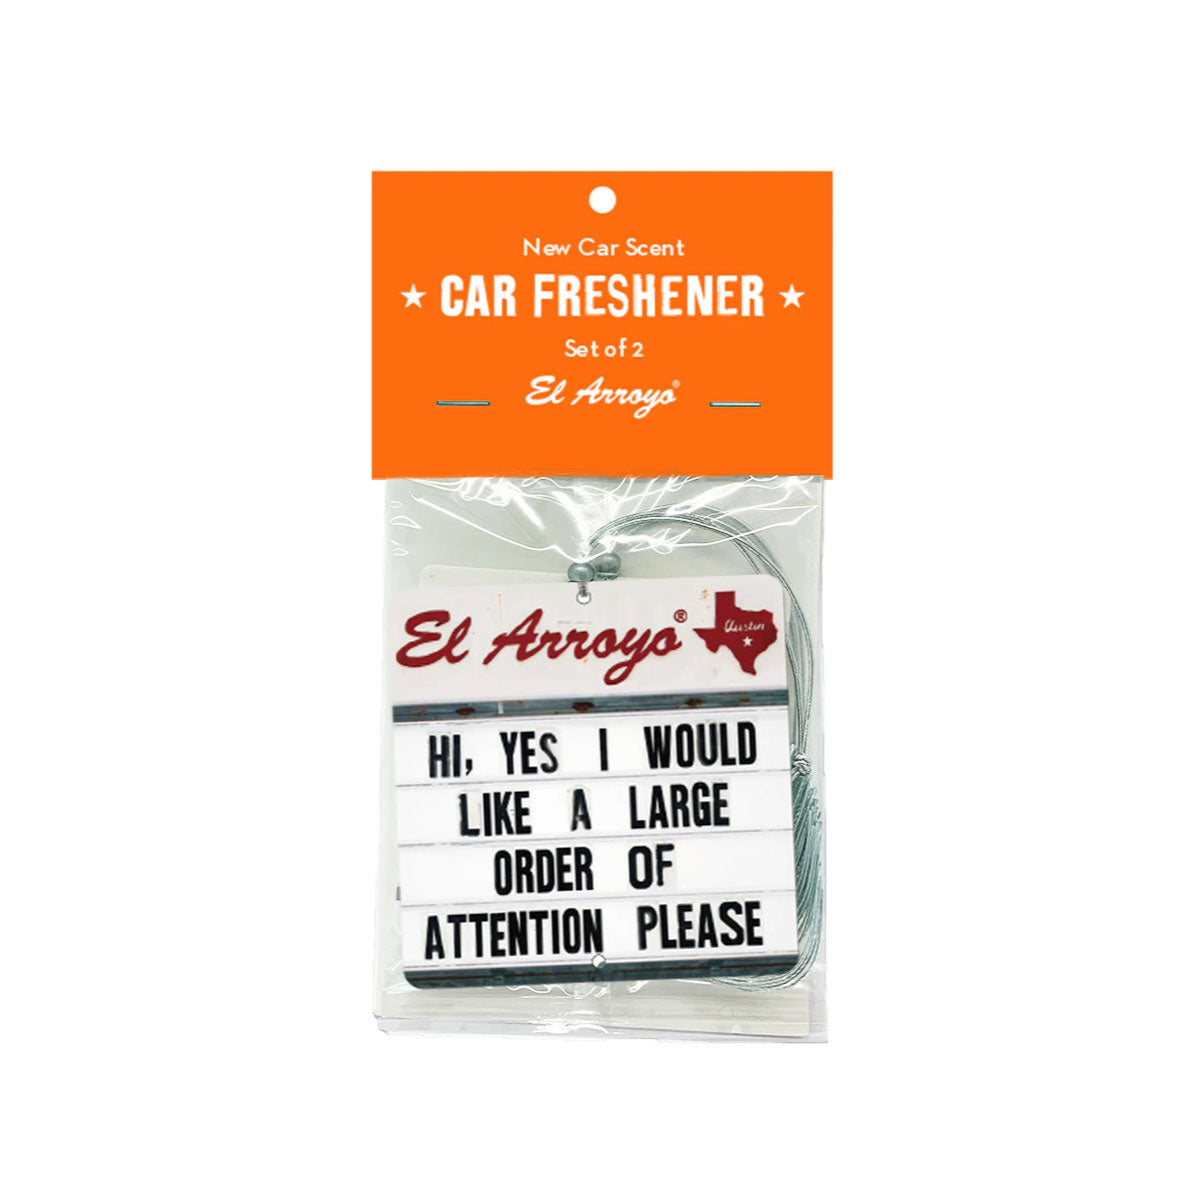 El Arroyo Car Fresheners - Large Order of Attention